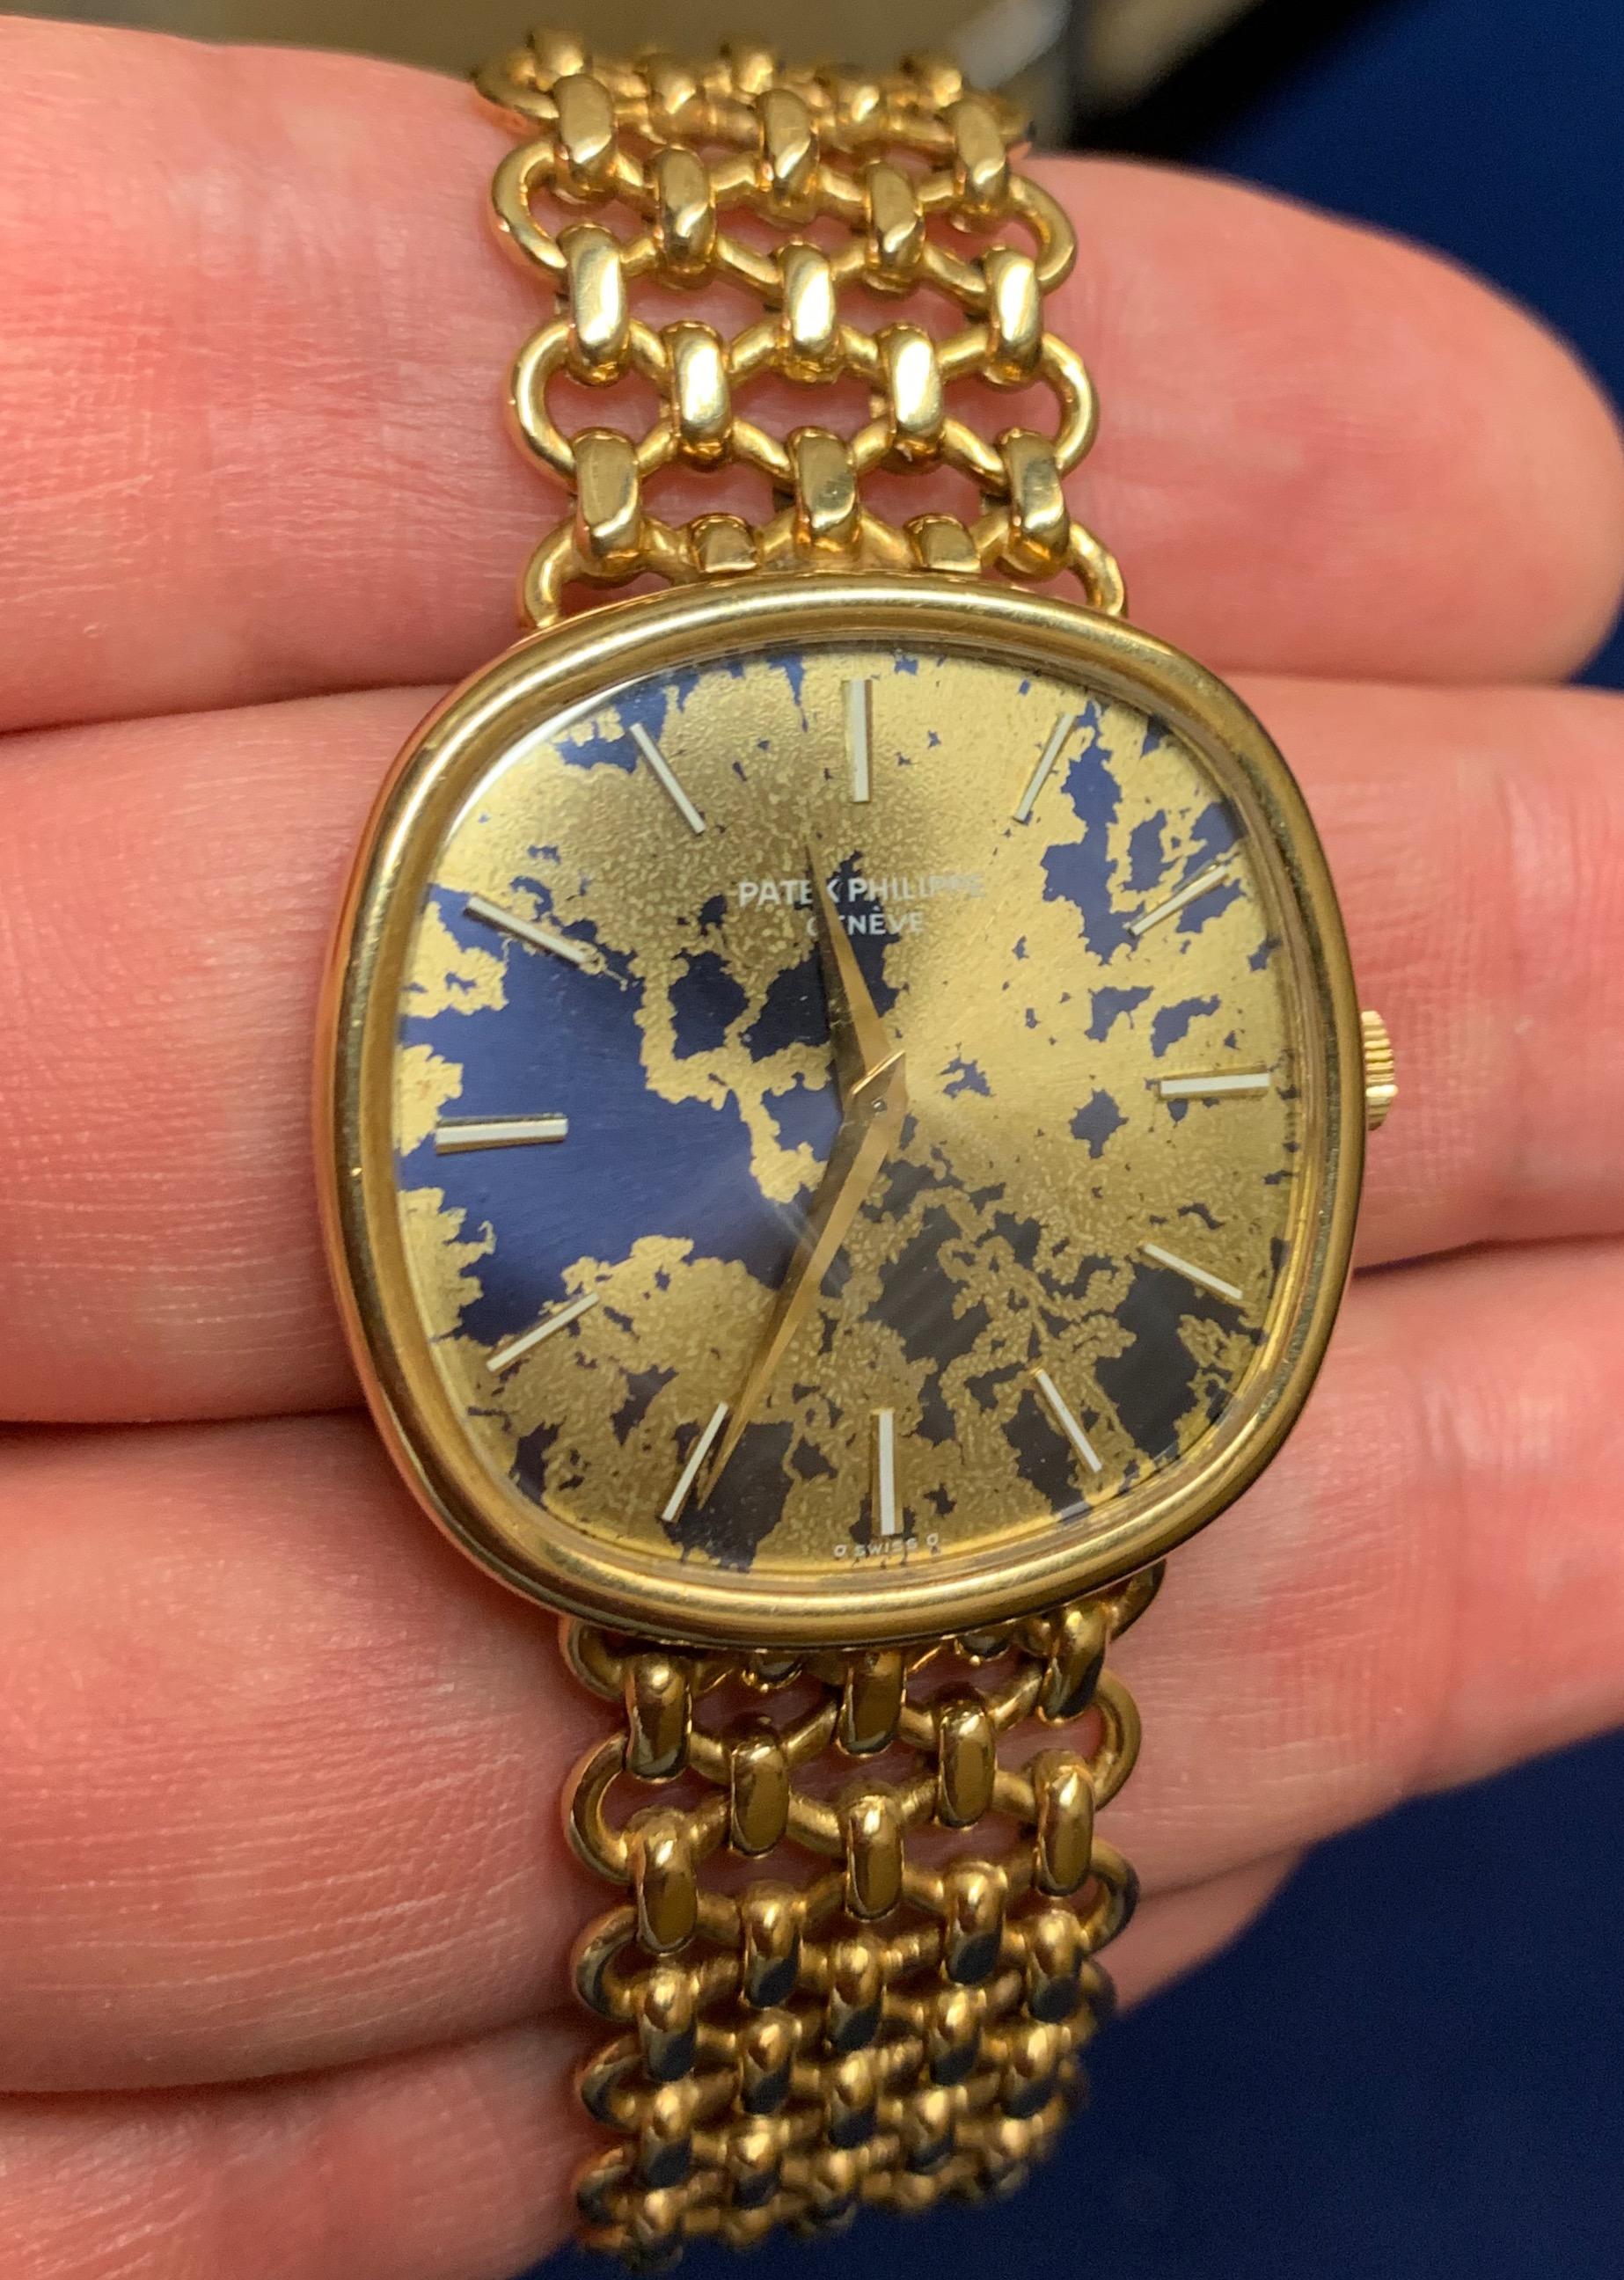 Gold Unique Patek Philippe 3844 with Amazing Worldmap Dial / 4. of july ! For Sale